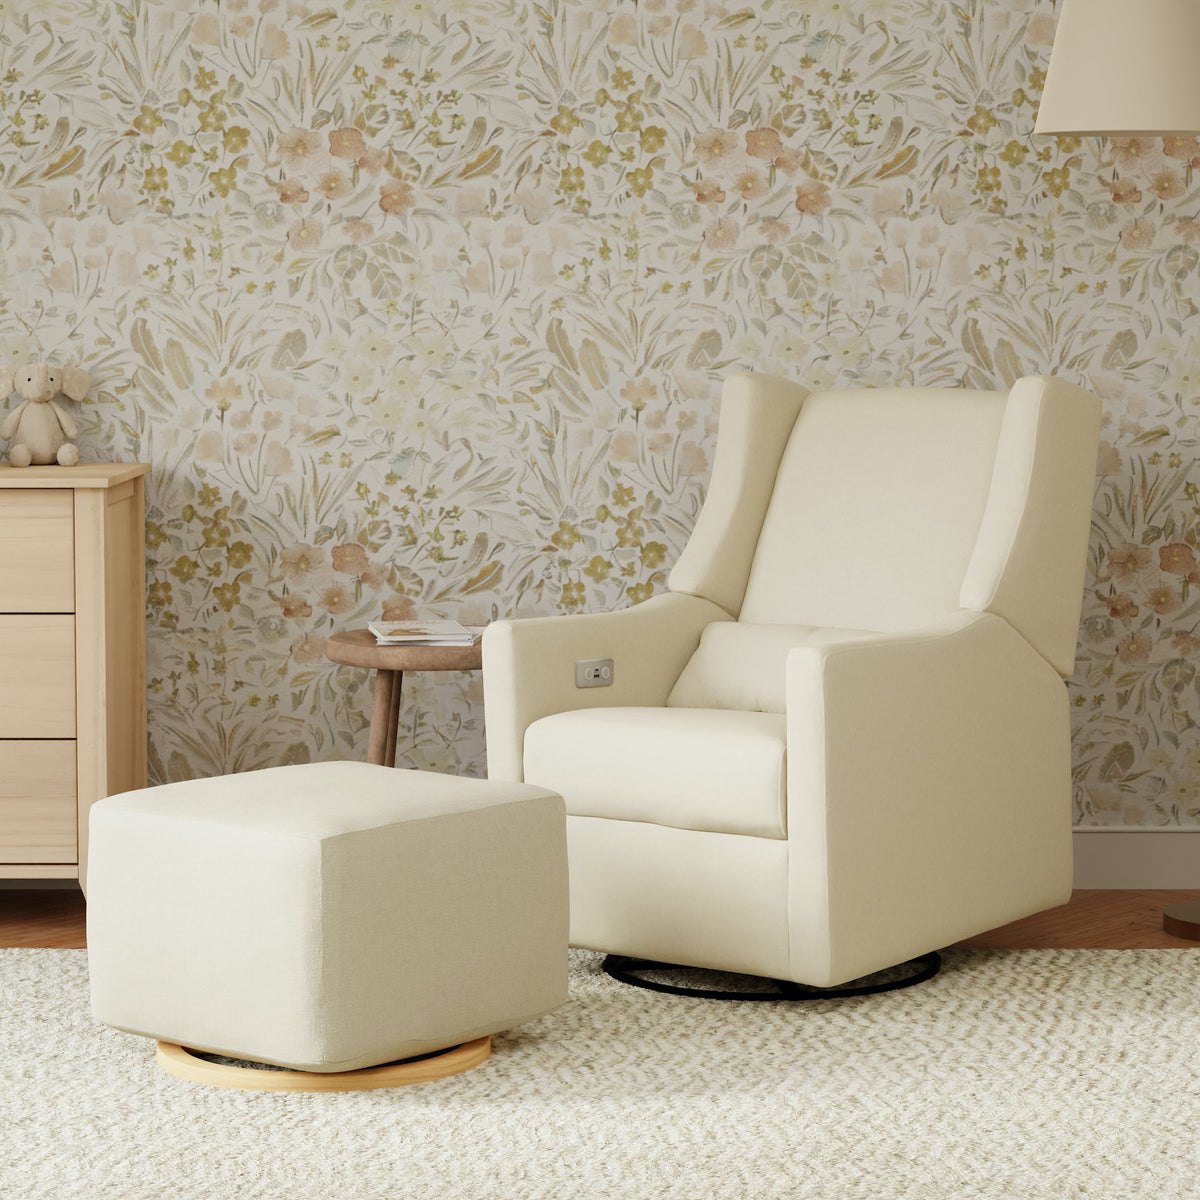 Kiwi Electronic Recliner + Swivel Glider in Eco-Performance Fabric with USB Port - Cream